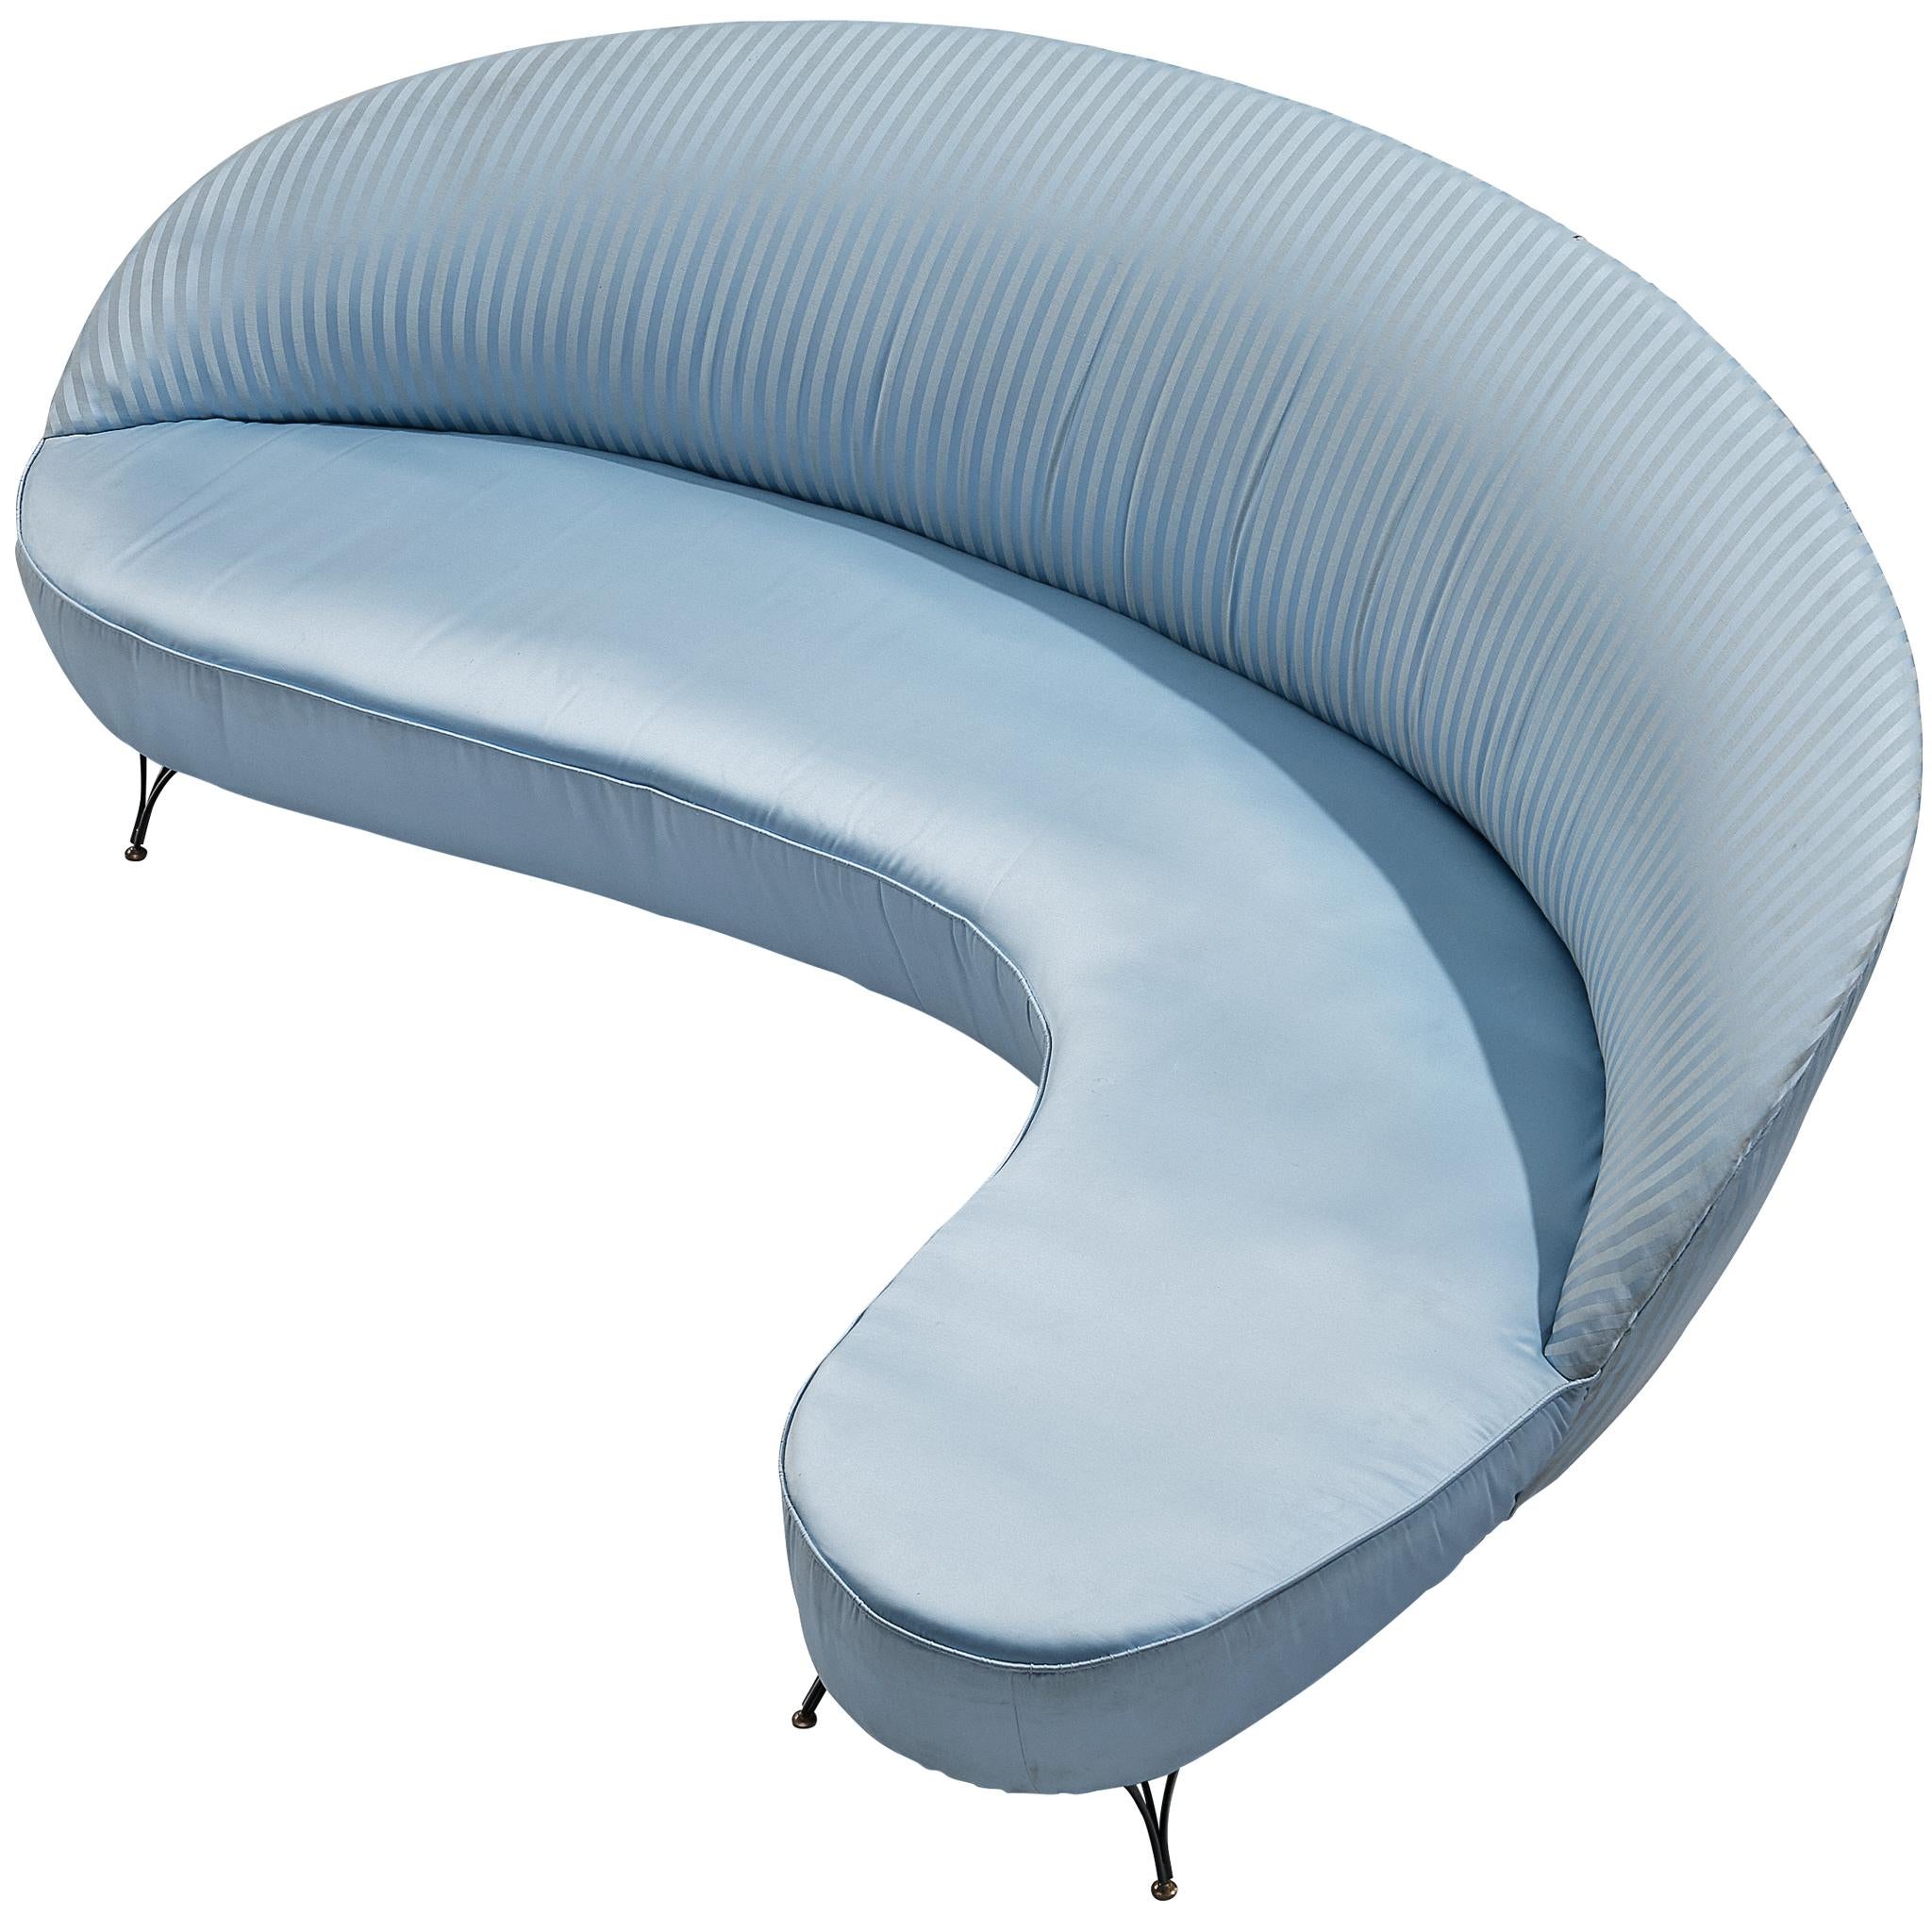 Italian Freeform Curved Sofa in Blue Upholstery